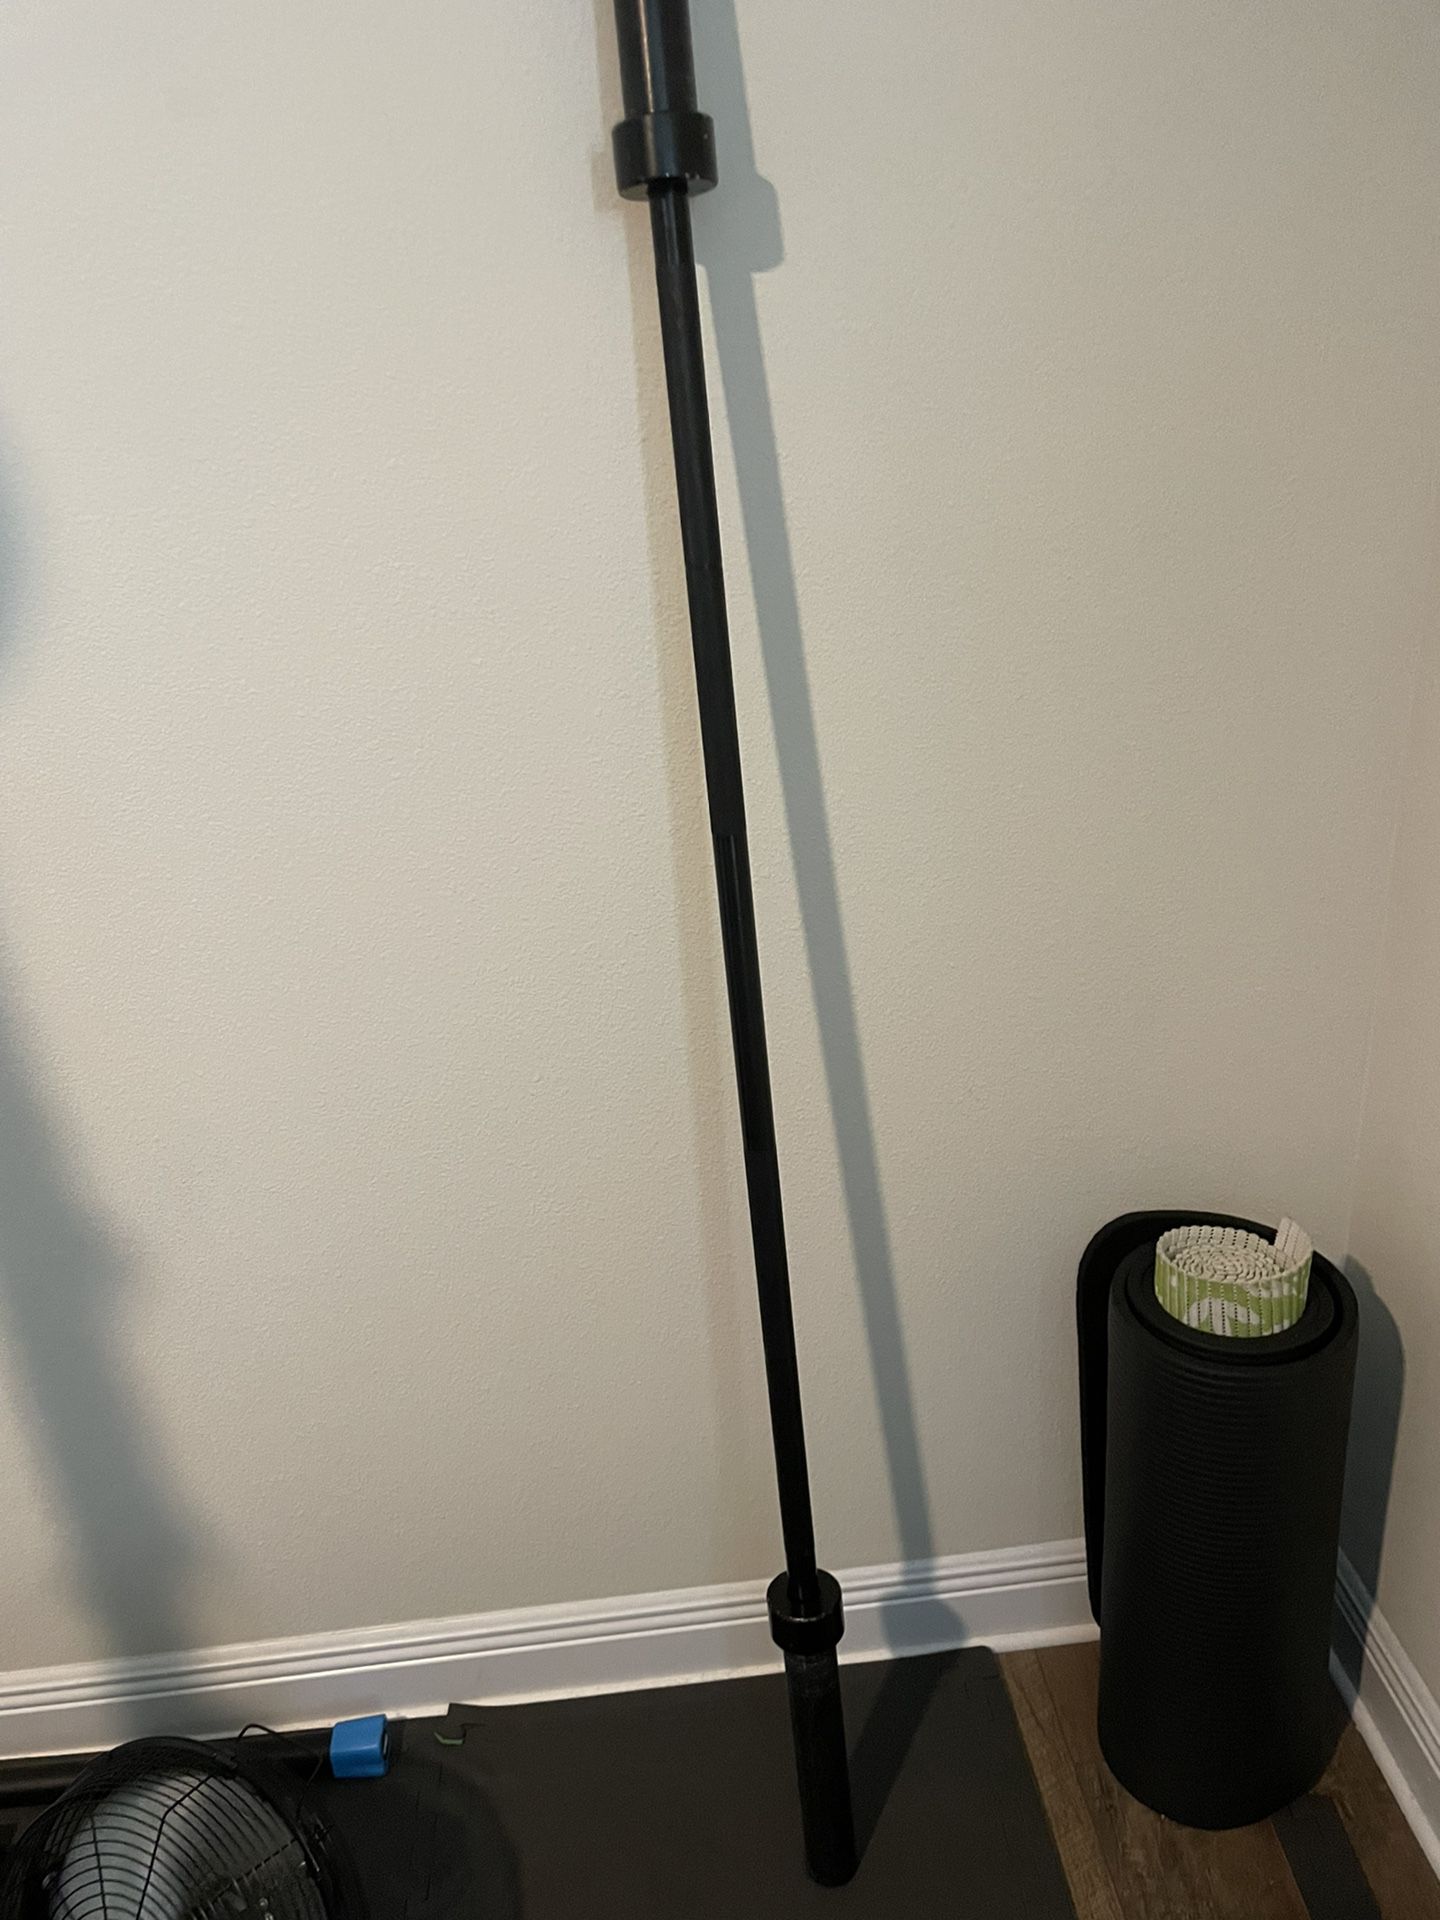 Olympic barbell 6 foot